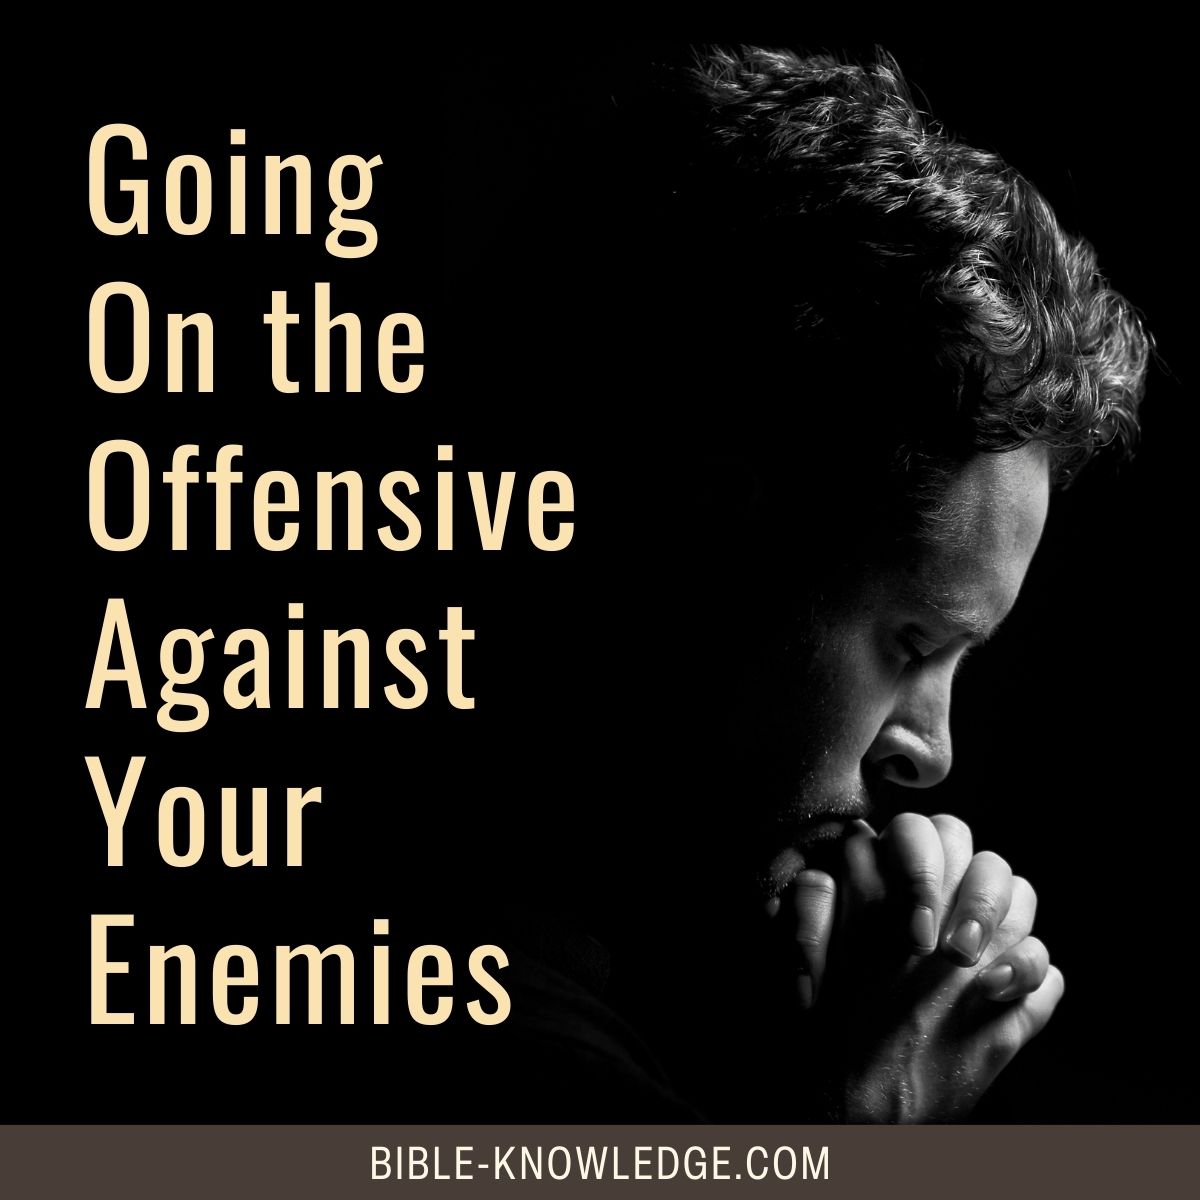 Going On the Offensive Against Your Enemies